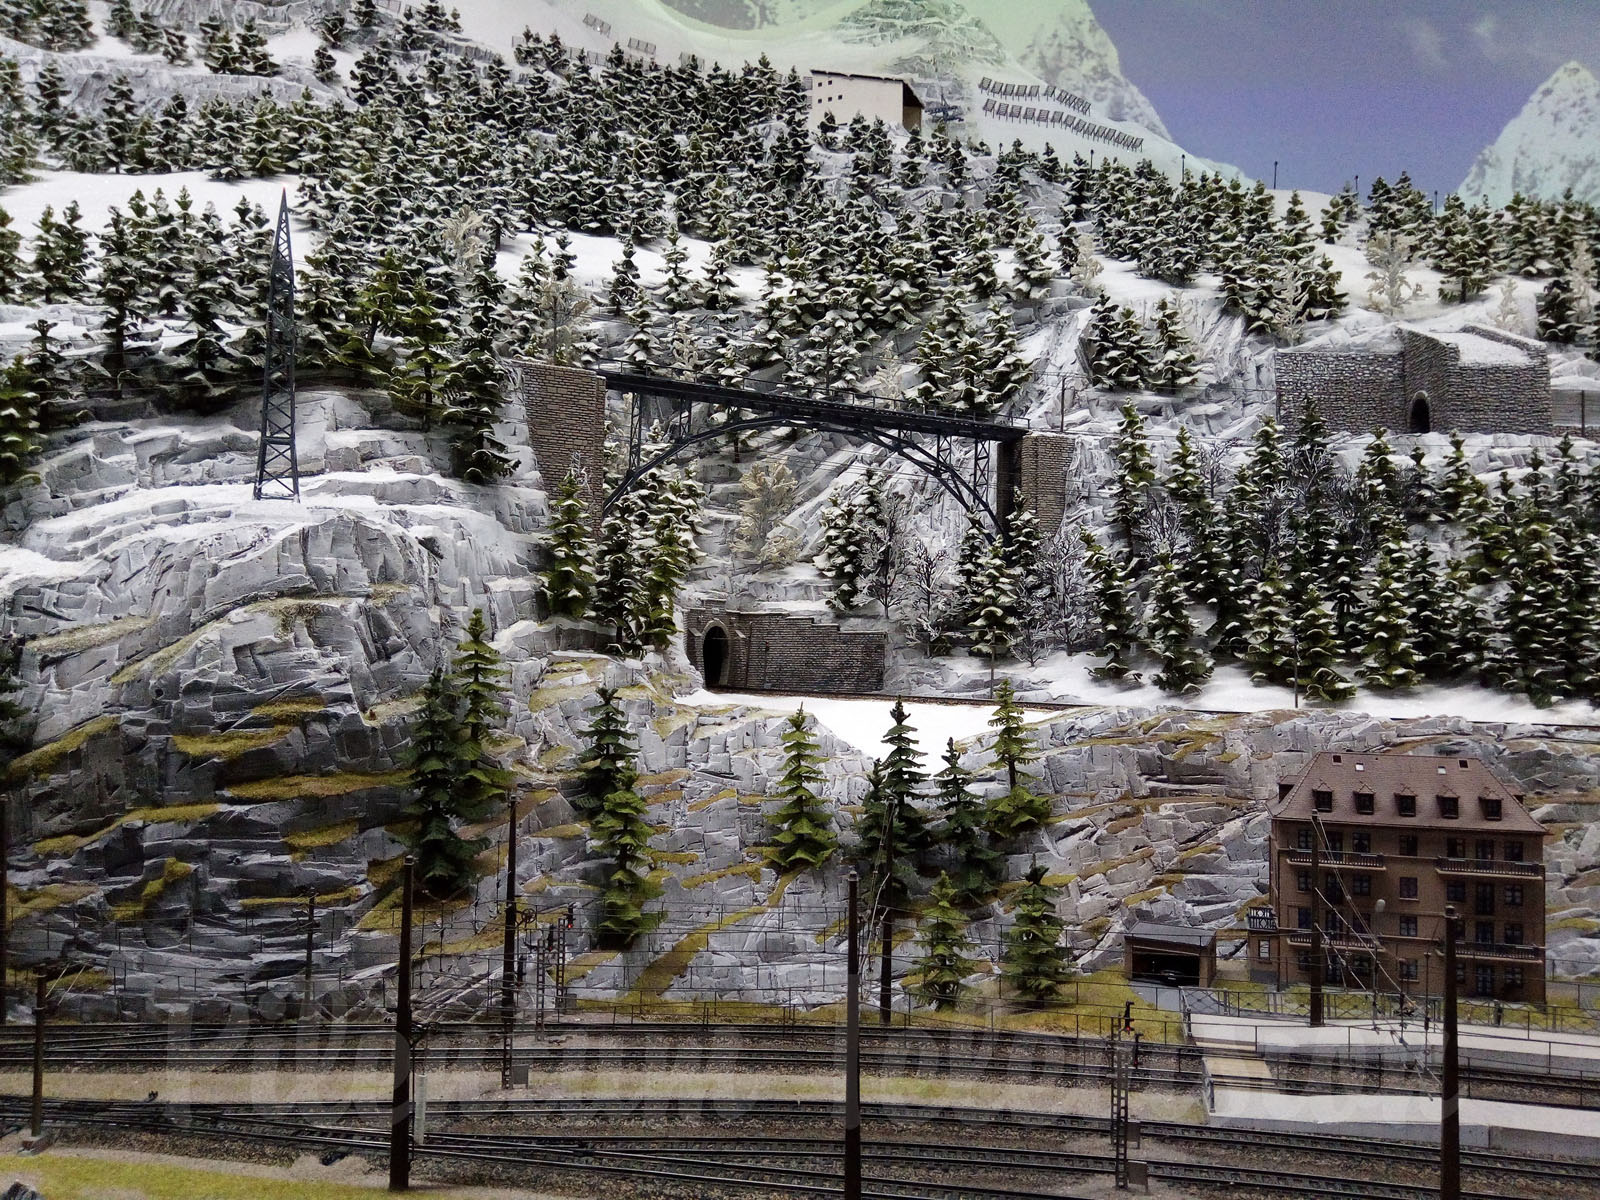 Porsche Model Railroad Museum with Model trains in HO Scale